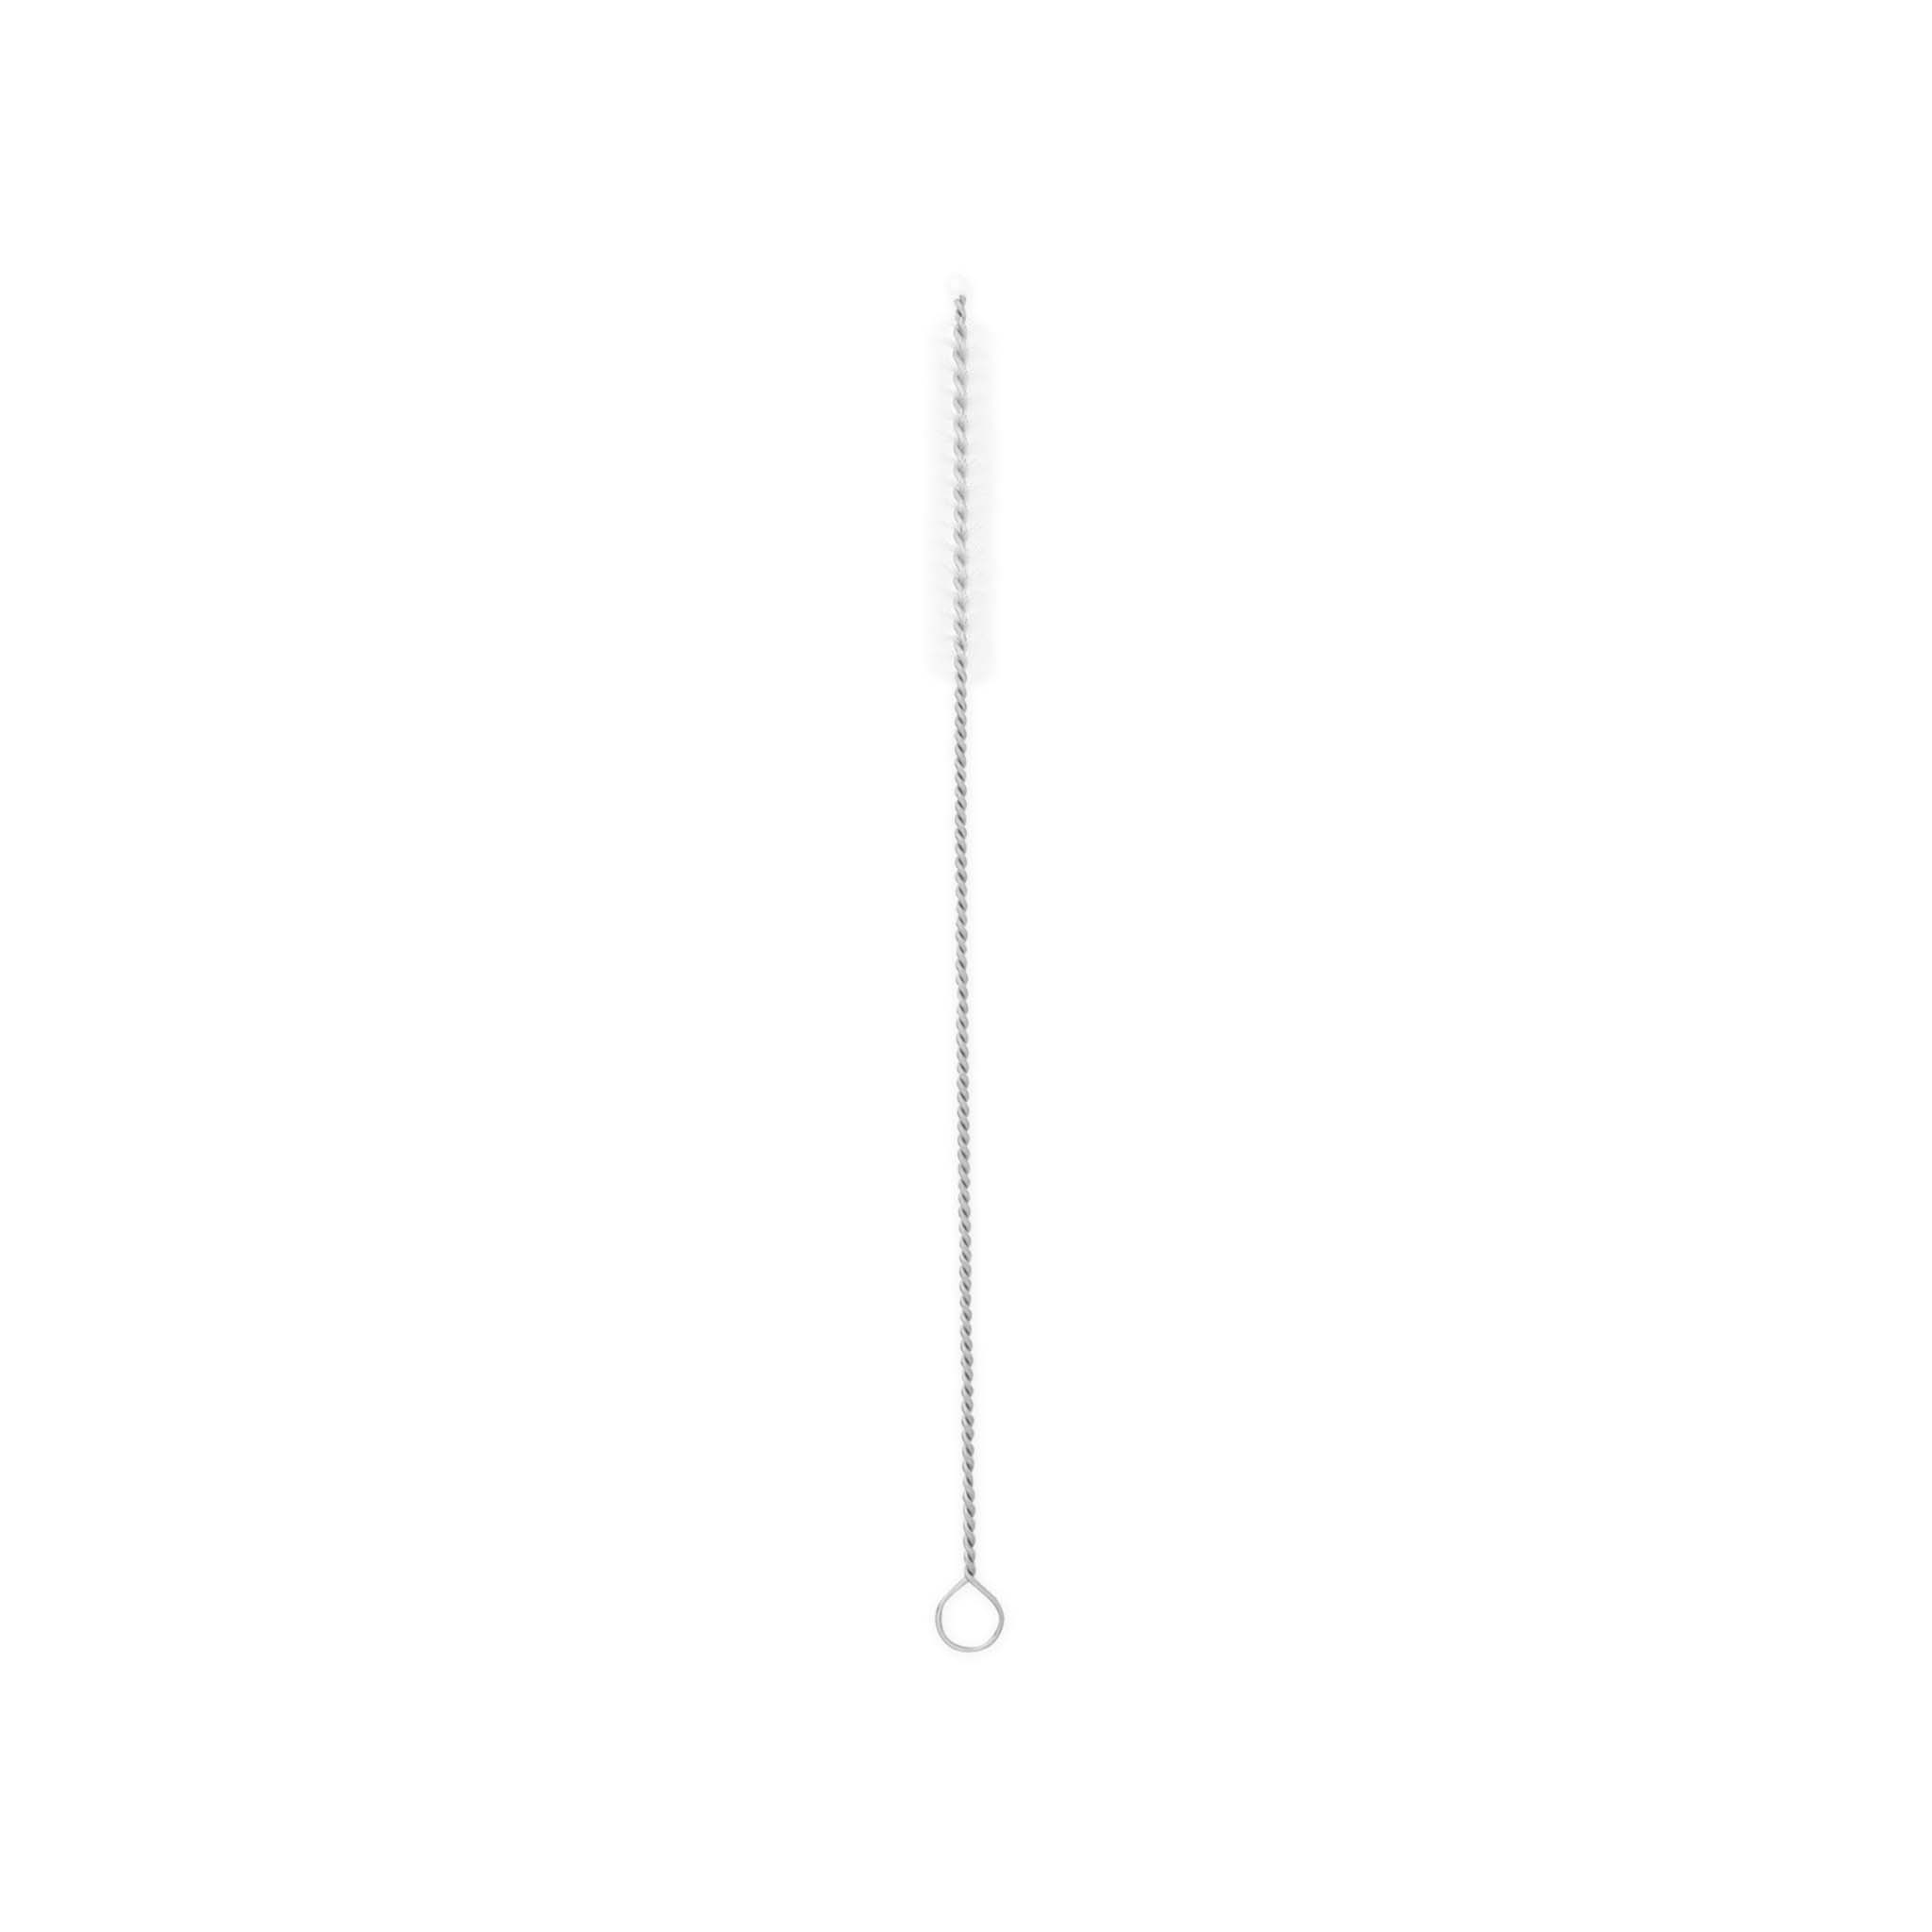 Reusable Stainless Steel Straight Straw (Blue)